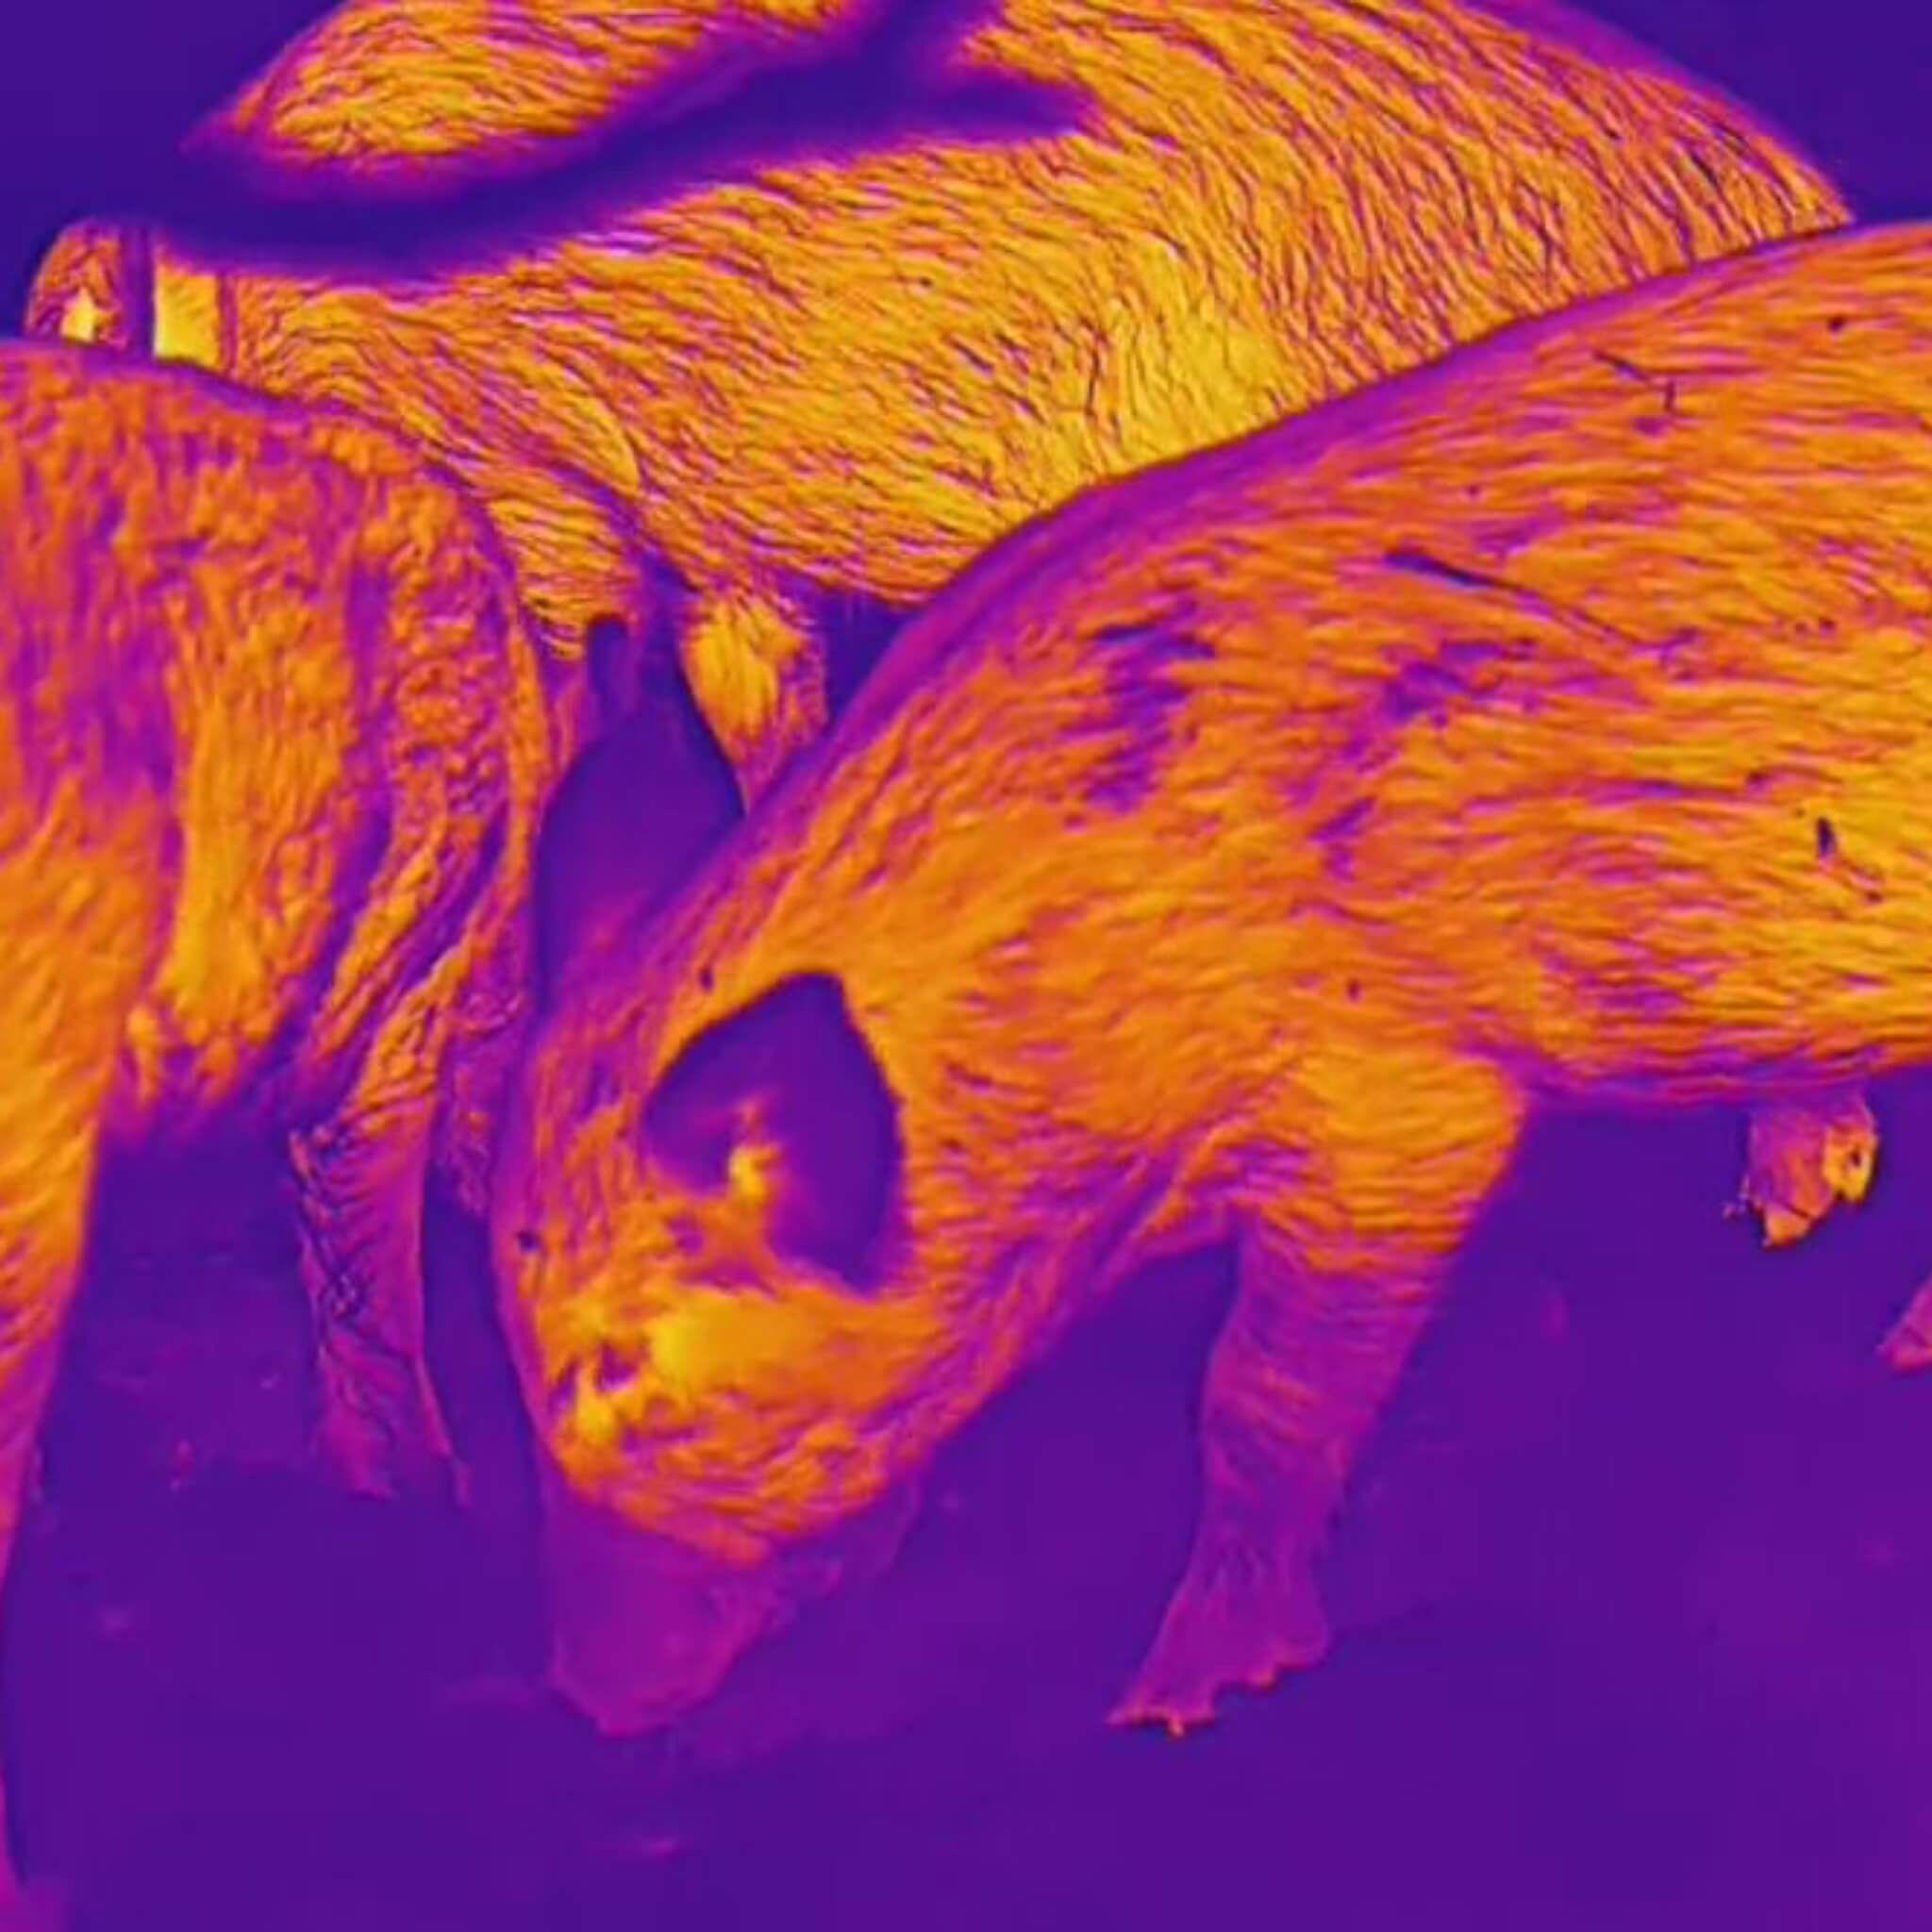 Thermal image of a group of pigs, likely Kunekune pigs, taken with a HikMicro Condor CQ50L Thermal Monocular. Their heat signatures are visible in shades of orange and yellow against a cool purple background.